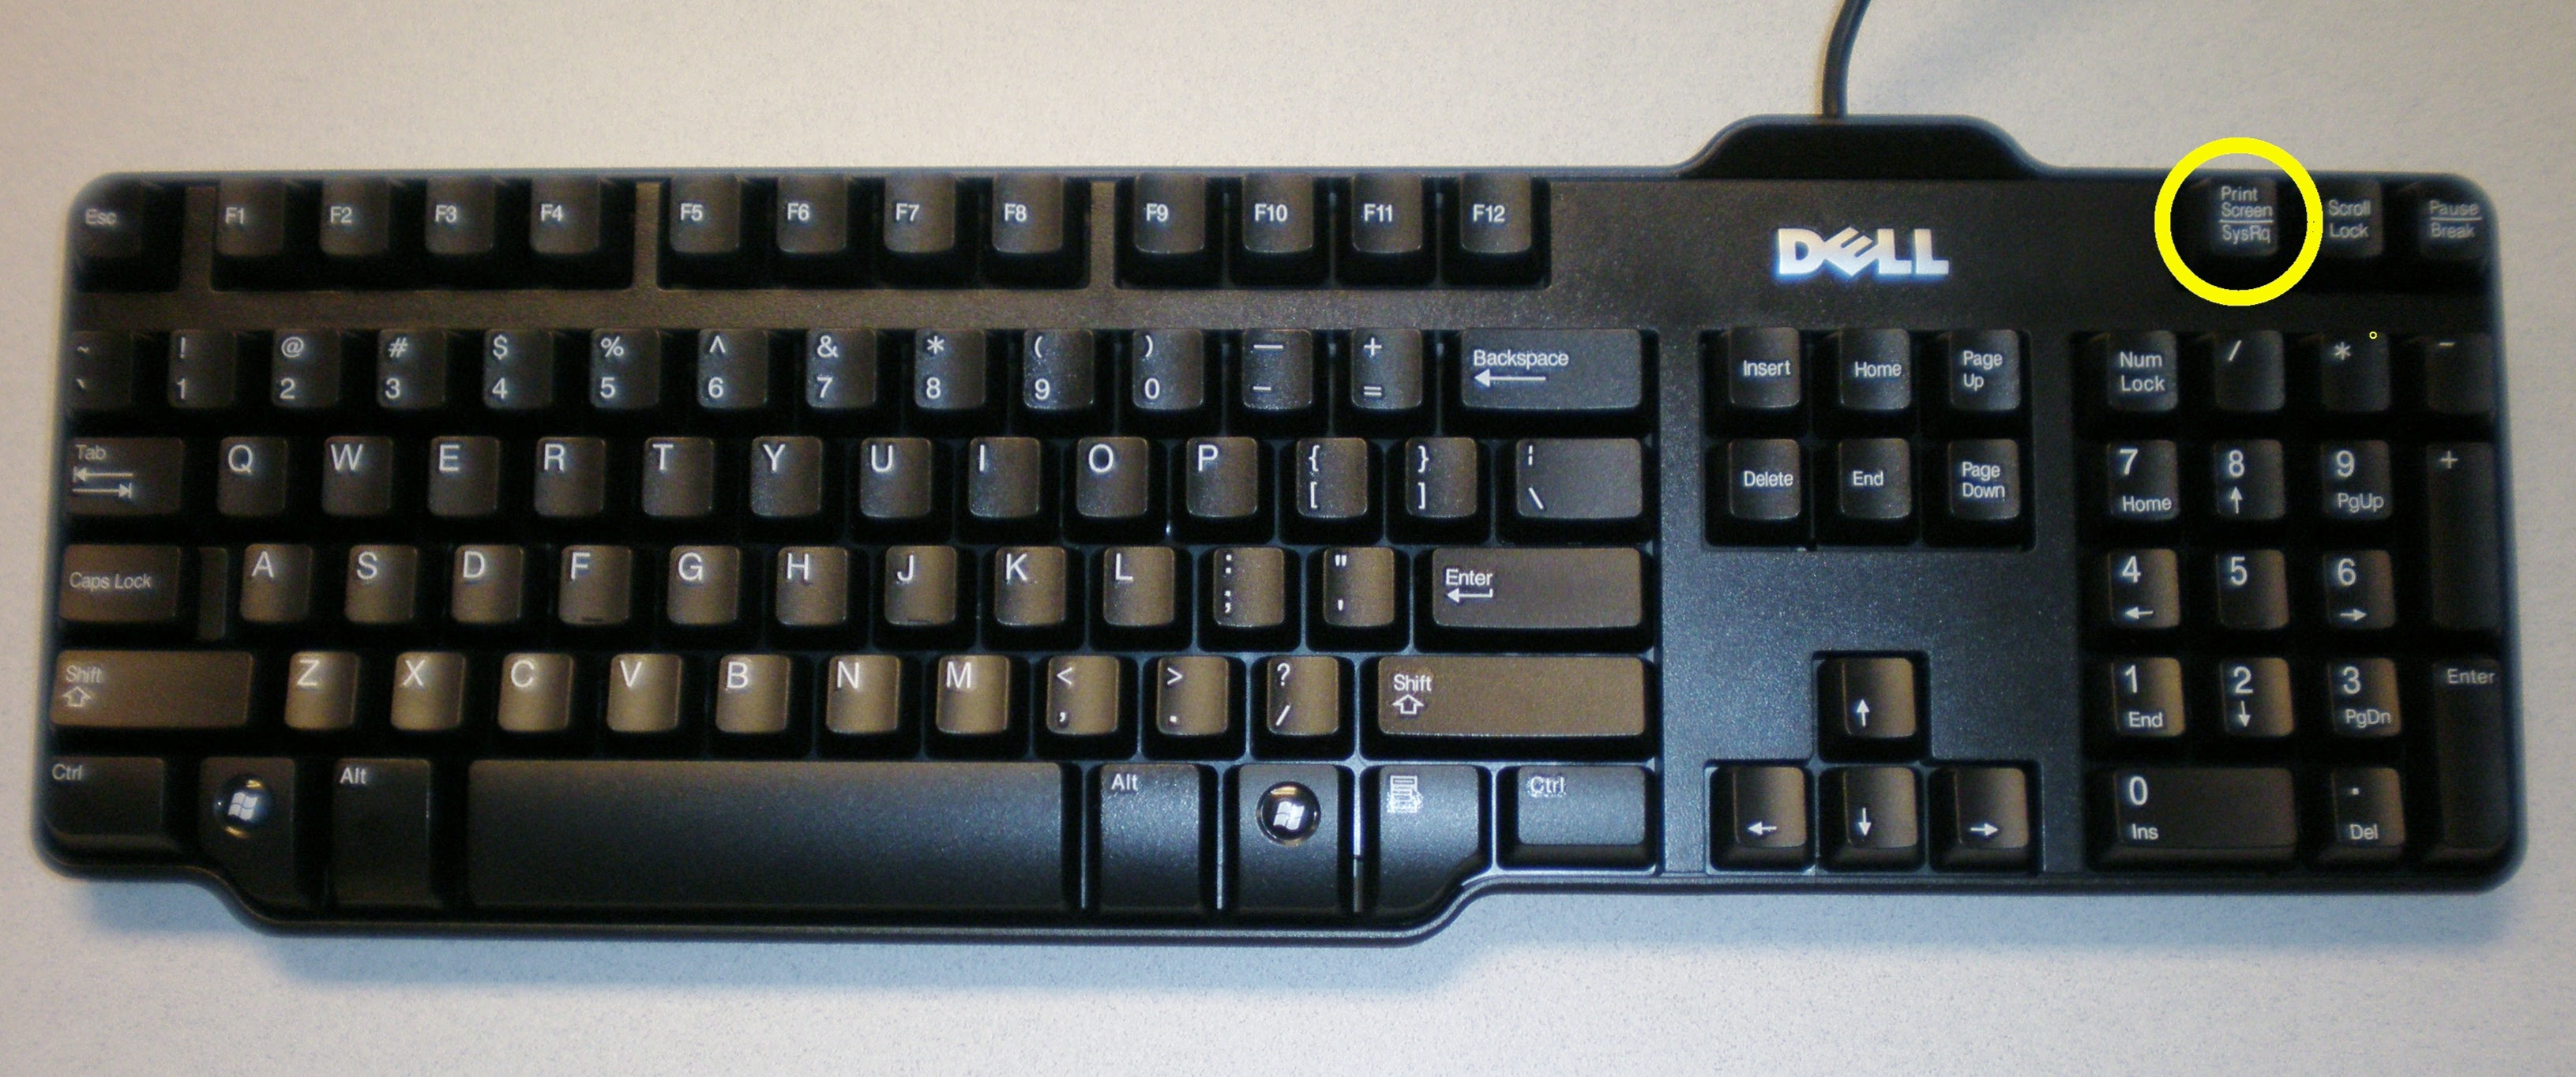 Command Button On Keyboard - Beginners guide for those switching from